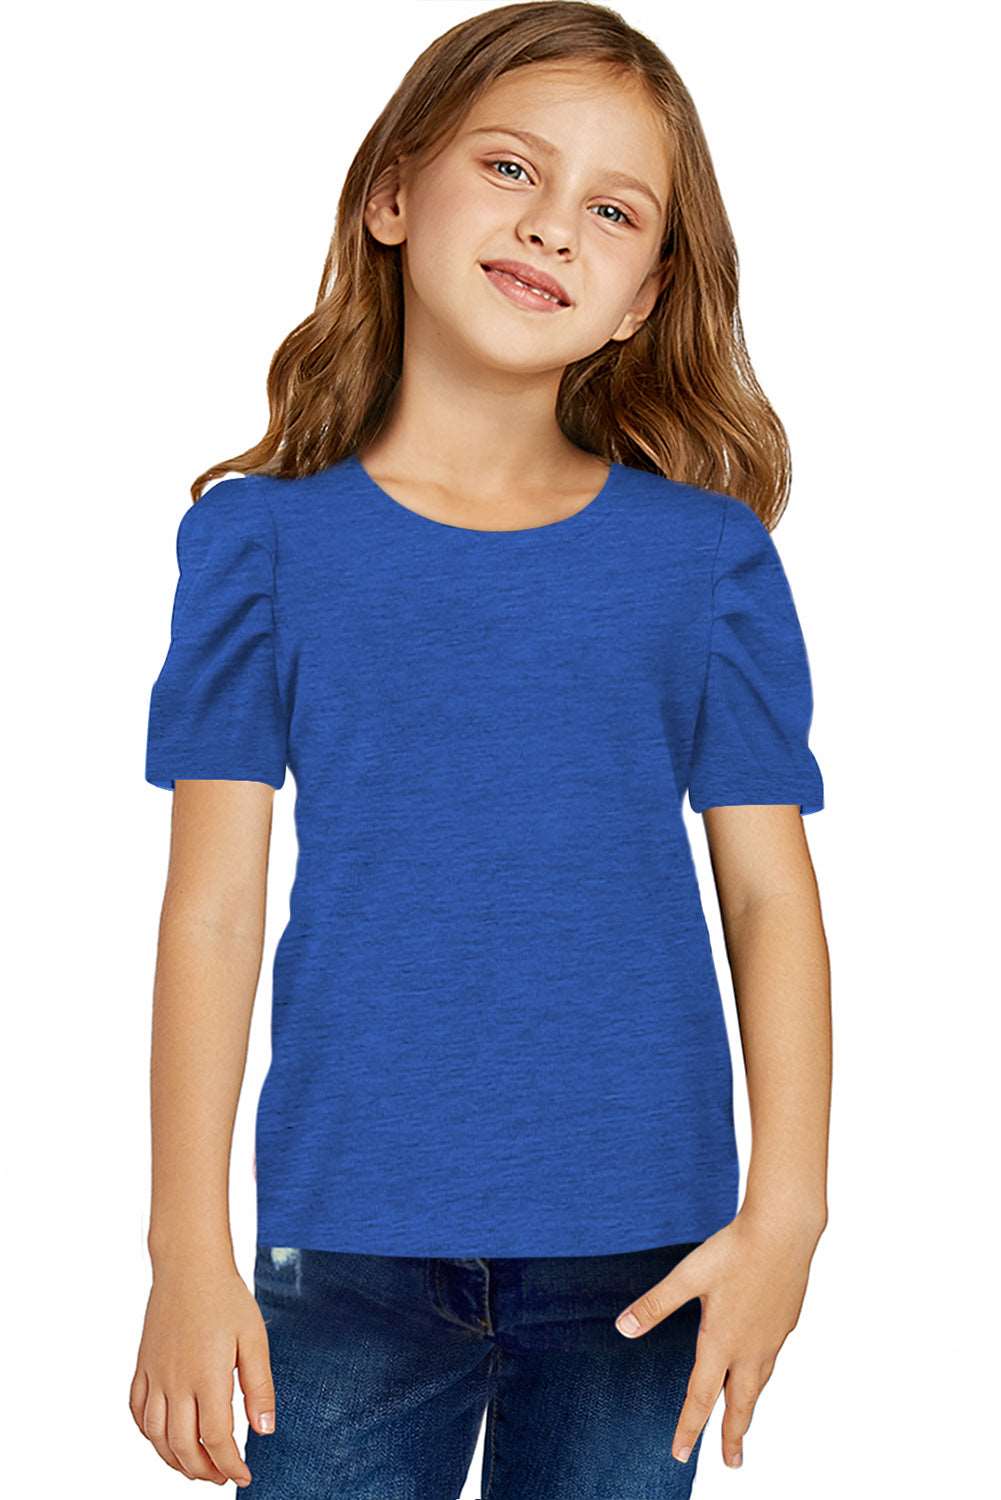 Girls Round Neck Puff Sleeve Blouse, royal blue, front view